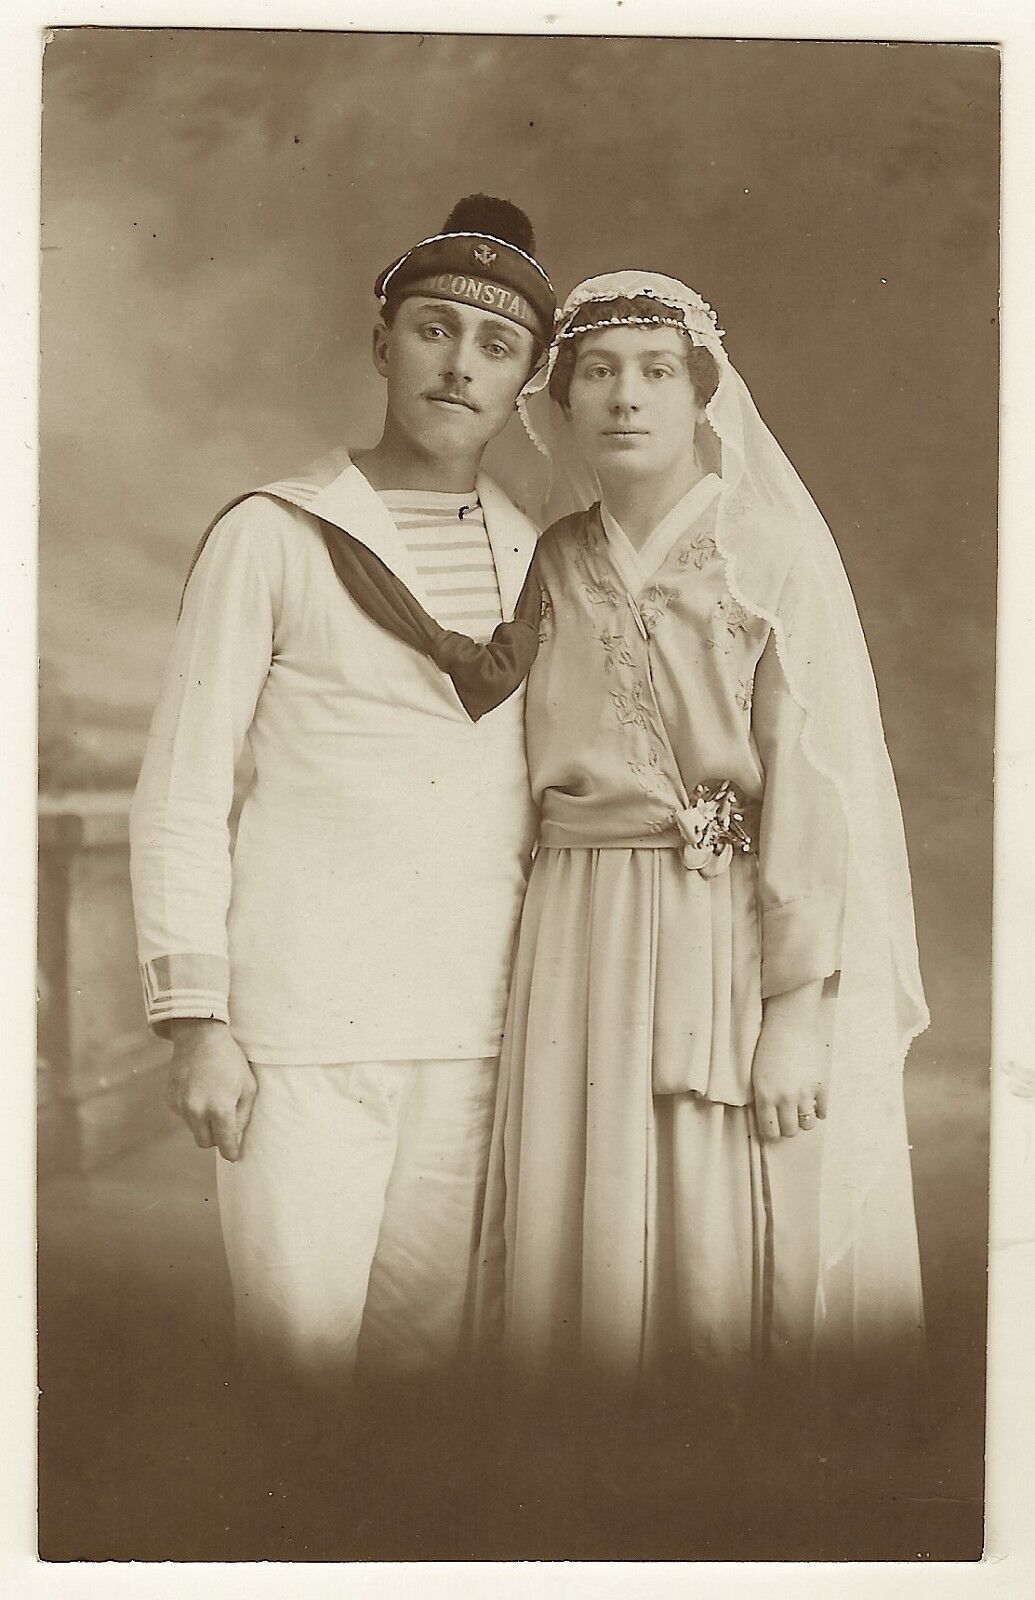 PORTRAIT OF A HANDSOME SAILOR AND HIS BRIDE IN SENS, FRANCE